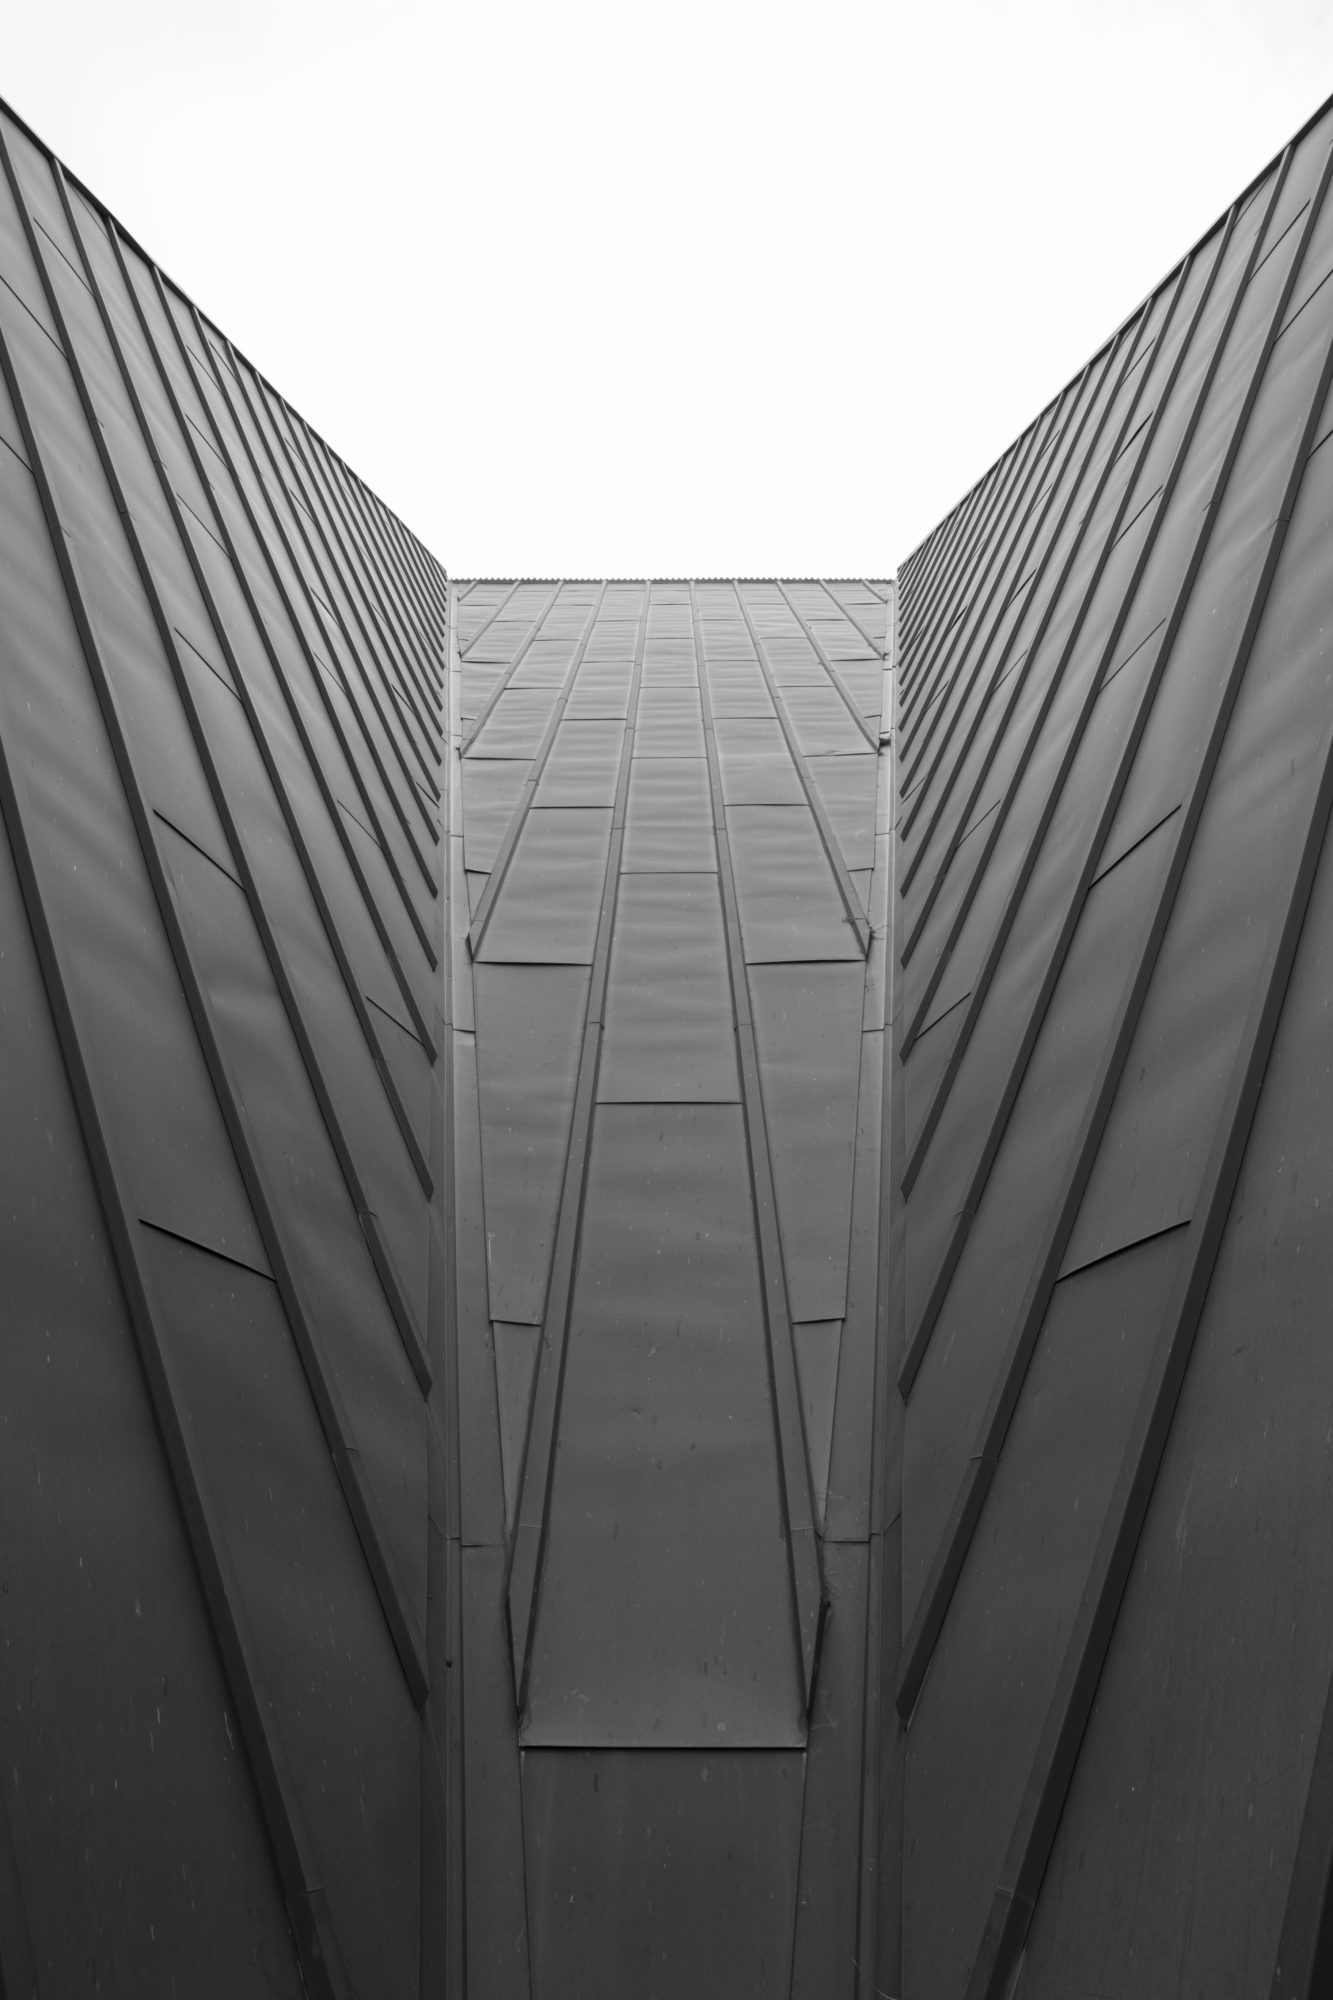 Black and white symmetrical architectural detail of a roof